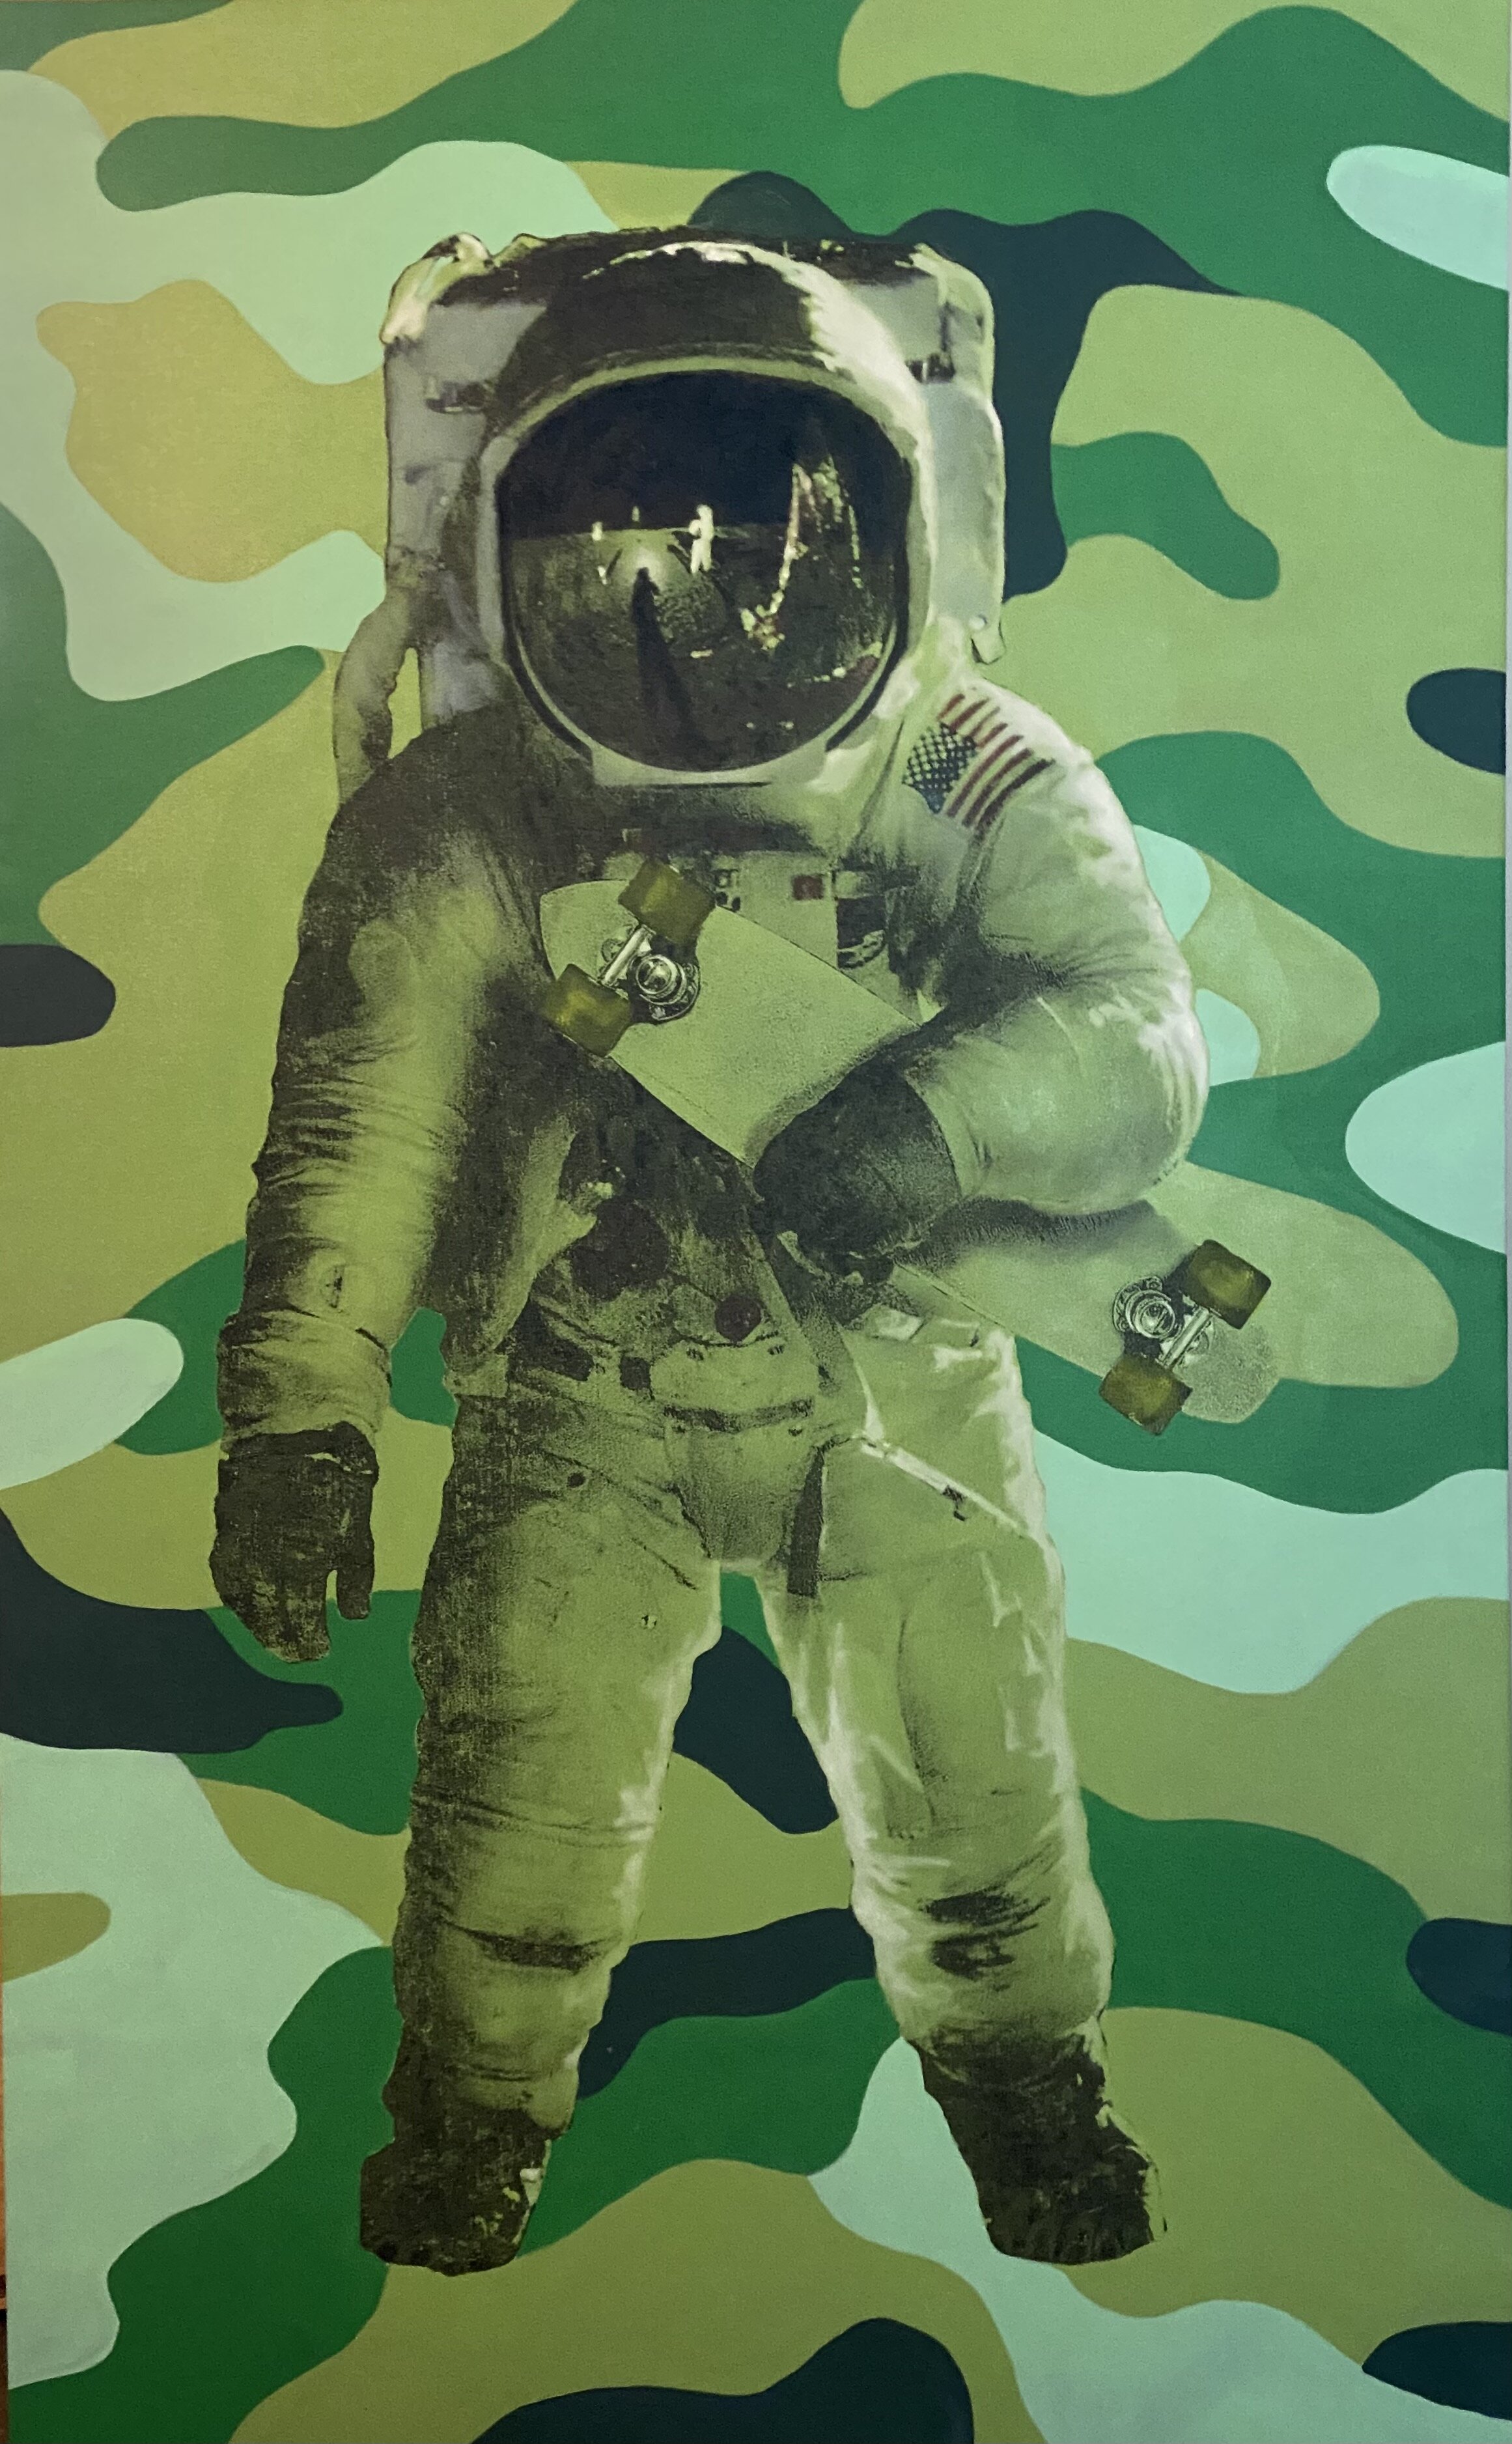   Camo Spaceboarder (Green), 2021   Screen print and acrylic on canvas, 78 x 48 inches 